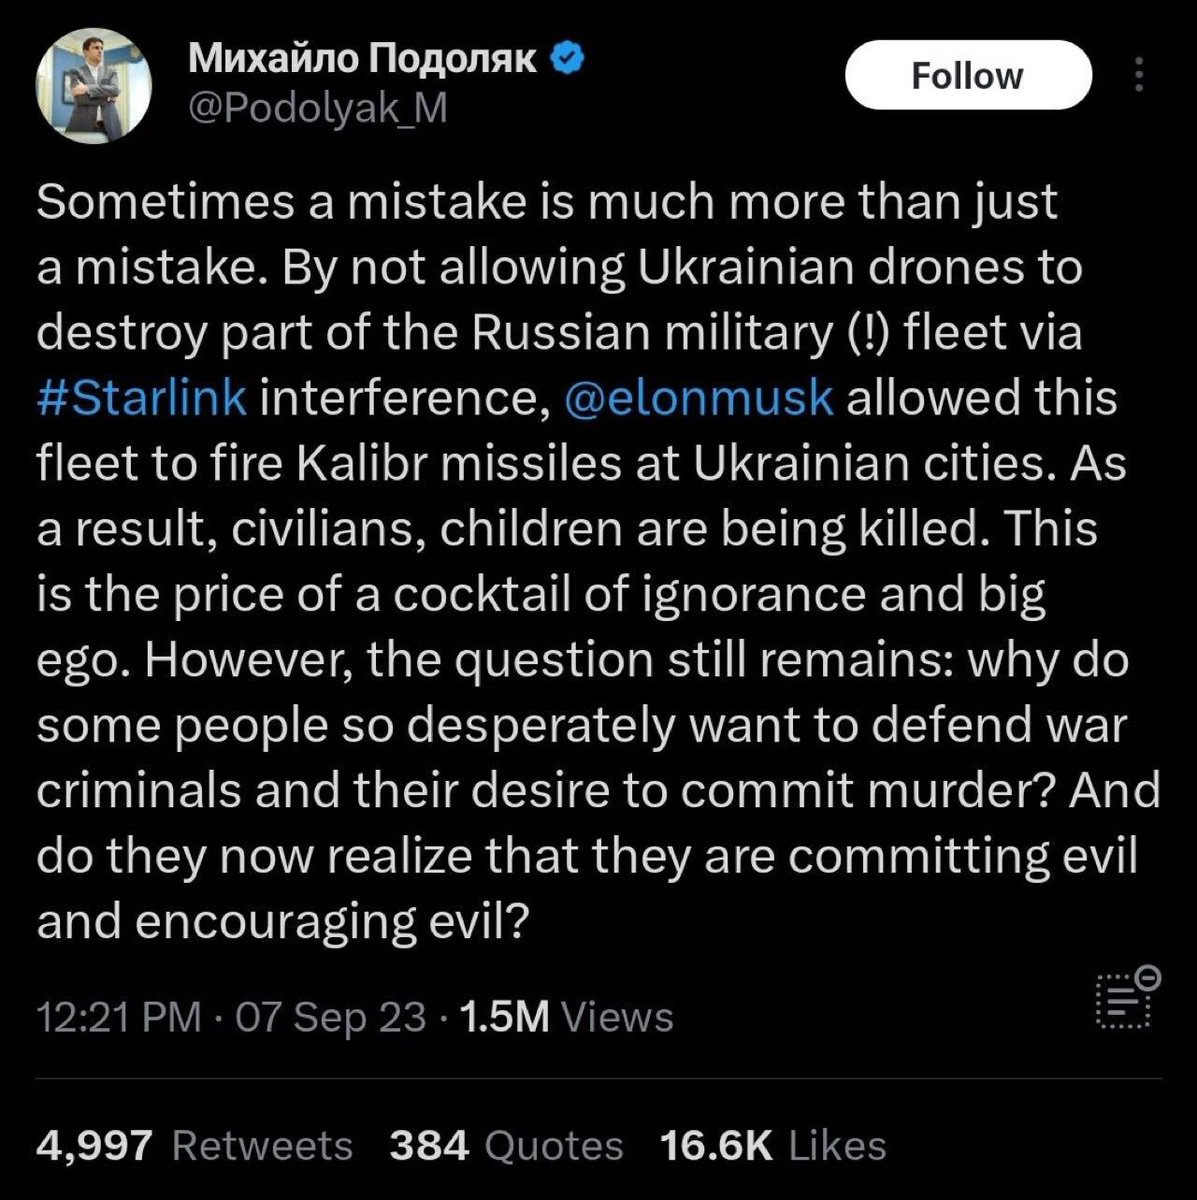 A top advisor to Zelensky states that Elon Musk's decision to assist Russia by disabling Starlink for the Ukrainians led to the deaths of civilians, including children.